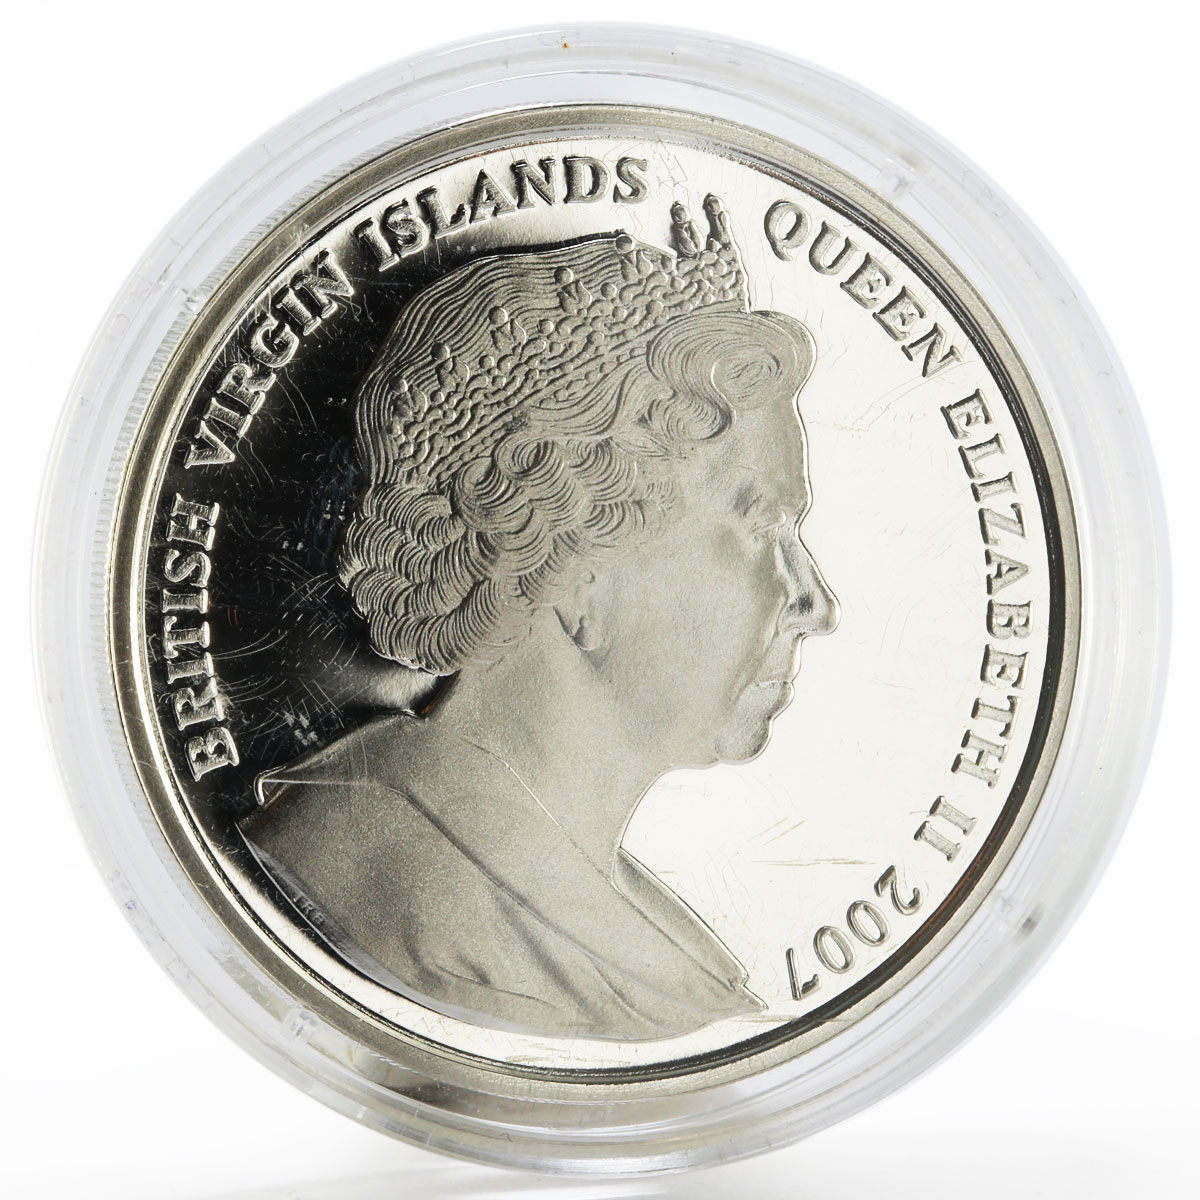 British Virgin Islands 10 dollars King Henry the Second proof silver coin 2007